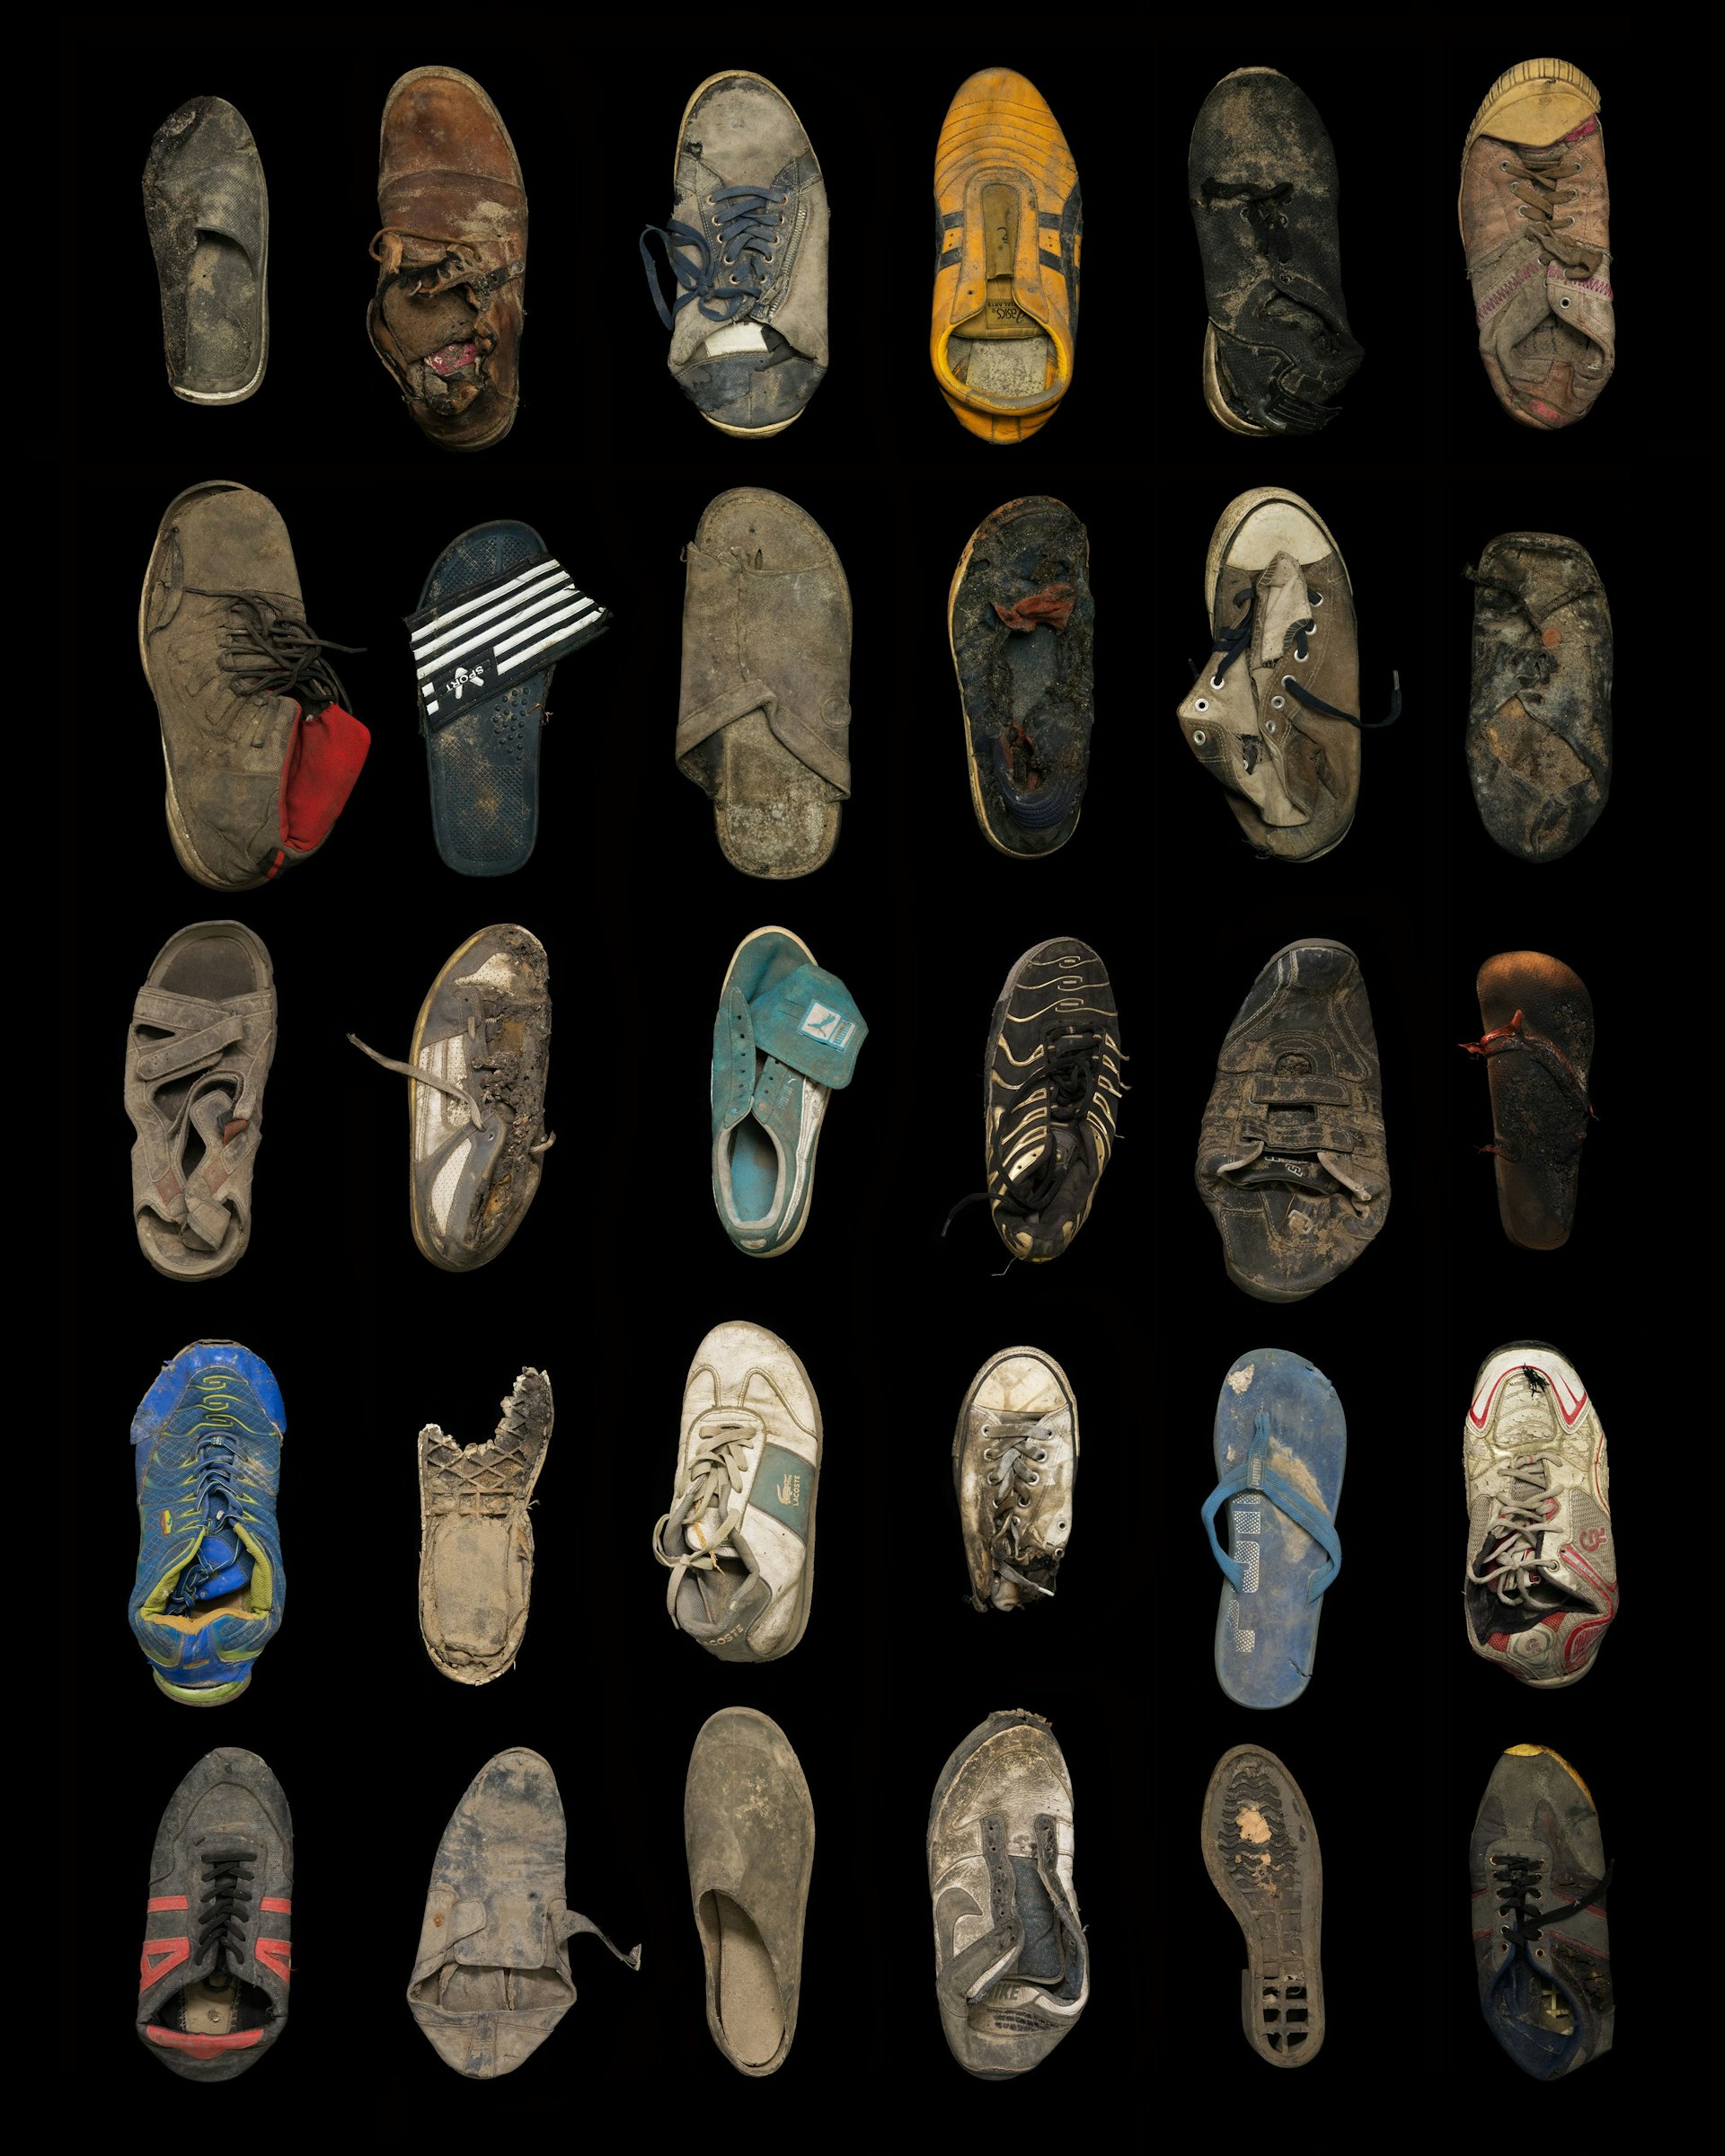 Thirty shoes, trainers and sandals Collected 21 May, 15 September, 27 October and 28 October 2016 © Gideon Mendel